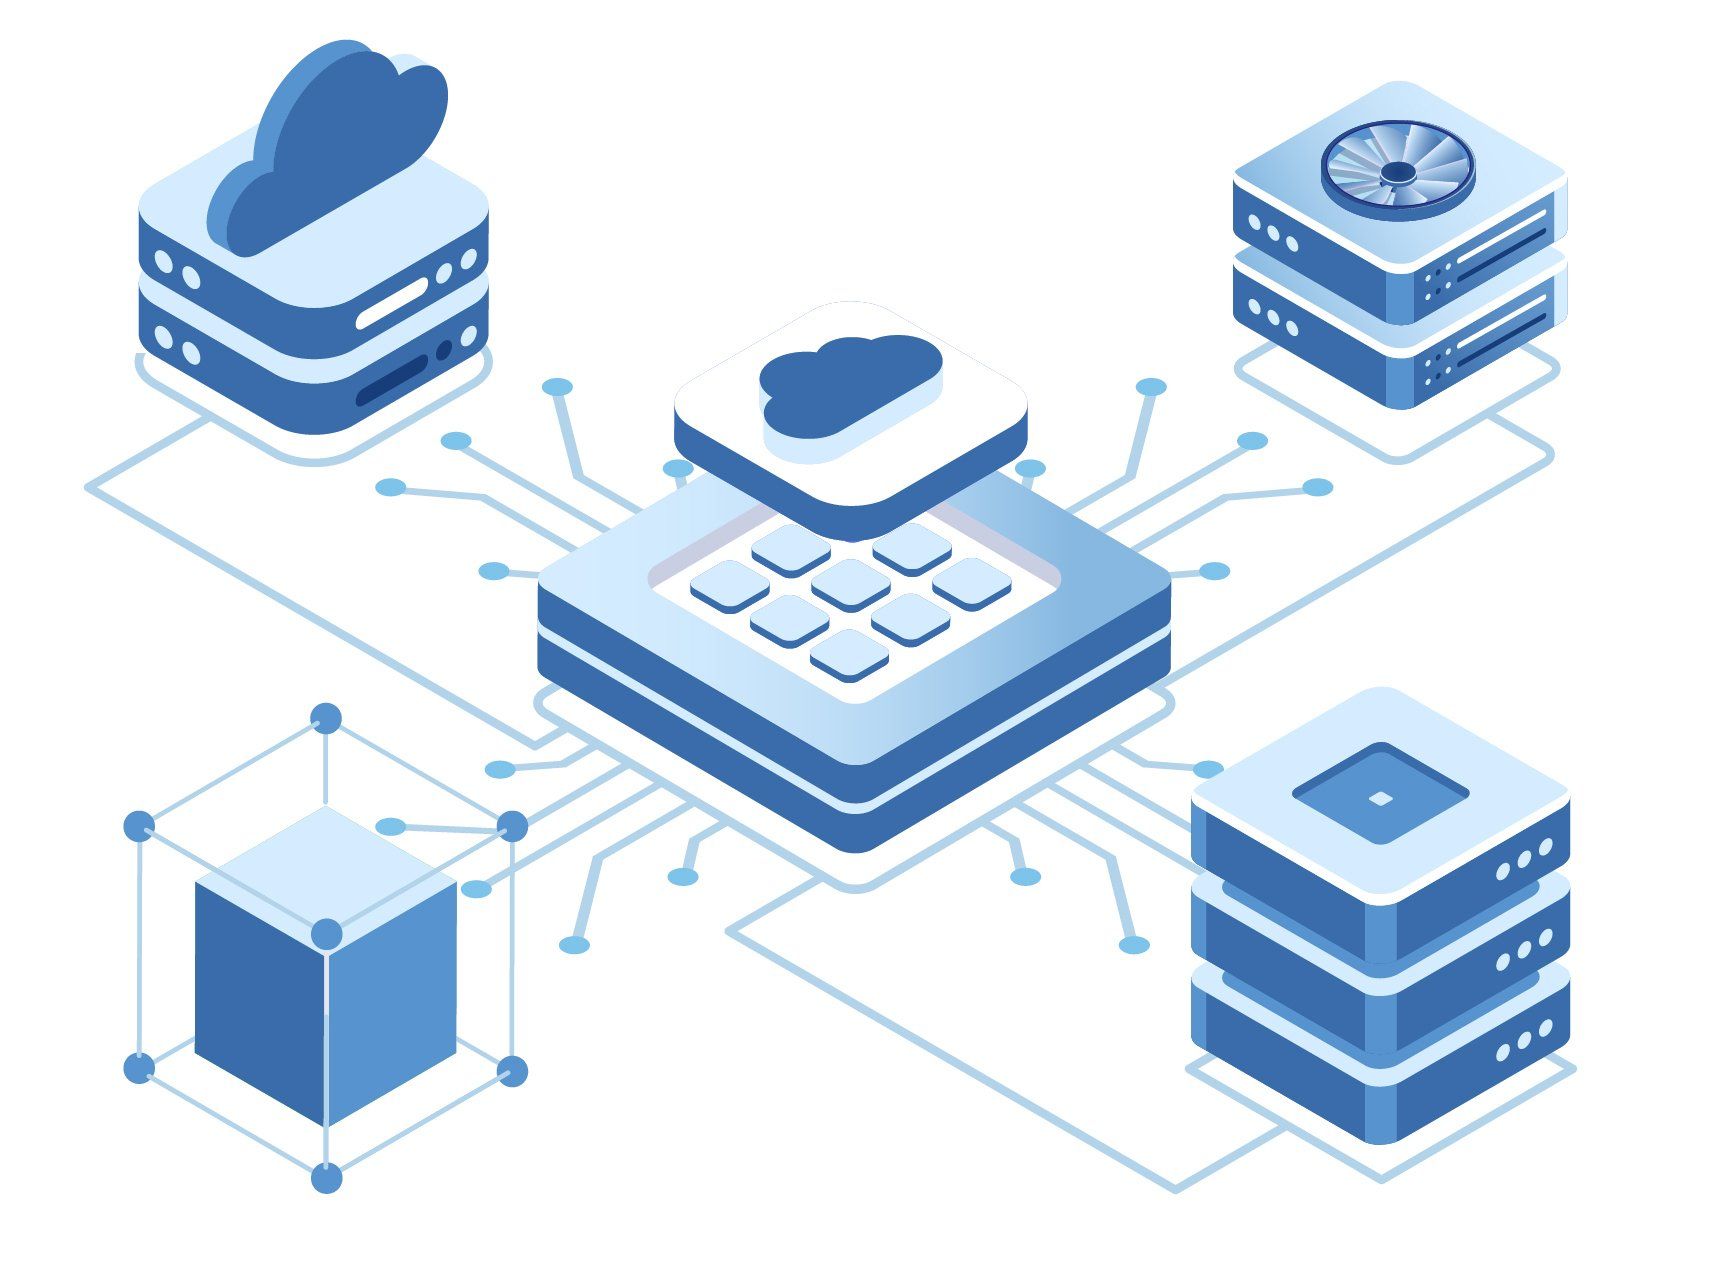 It is an isometric illustration of a cloud computing system.